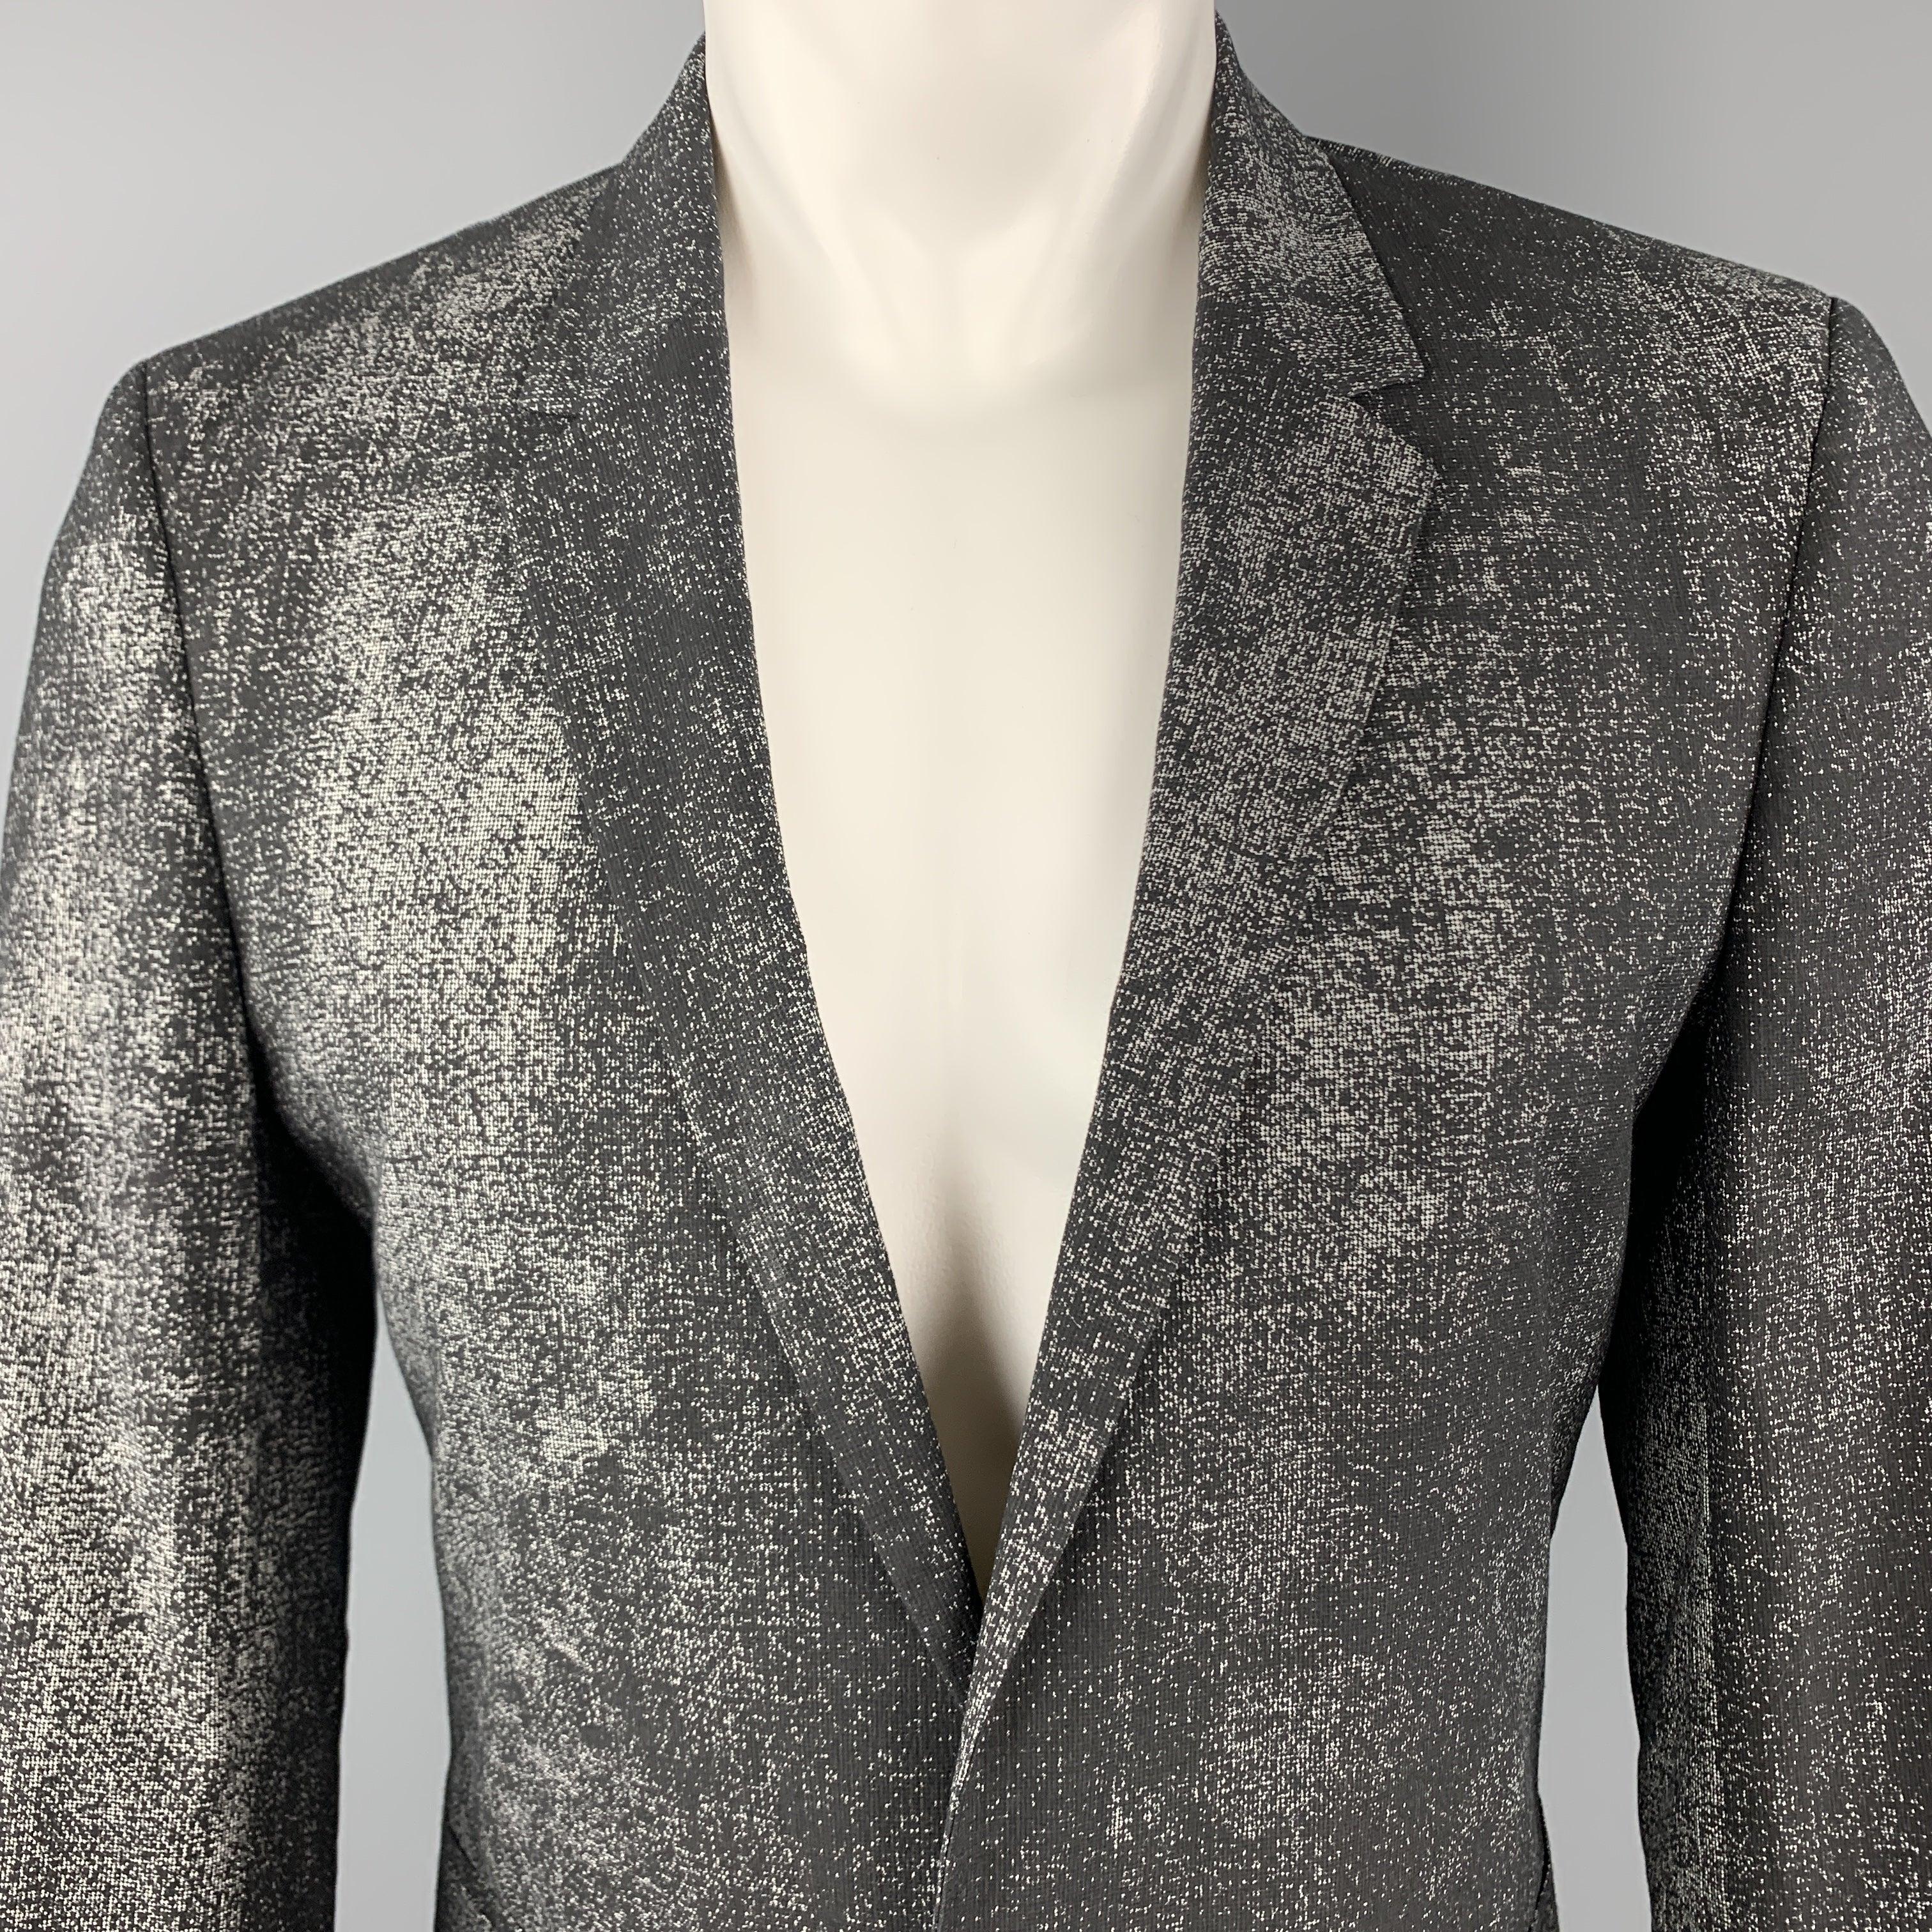 CALVIN KLEIN COLLECTION
sport coat comes in distressed painted print black and gray fabric with a notch lapel, single breasted, one button front, and double vented back.
Excellent Pre-Owned Condition. 

Marked:   IT 46 

Measurements: 
 
Shoulder: